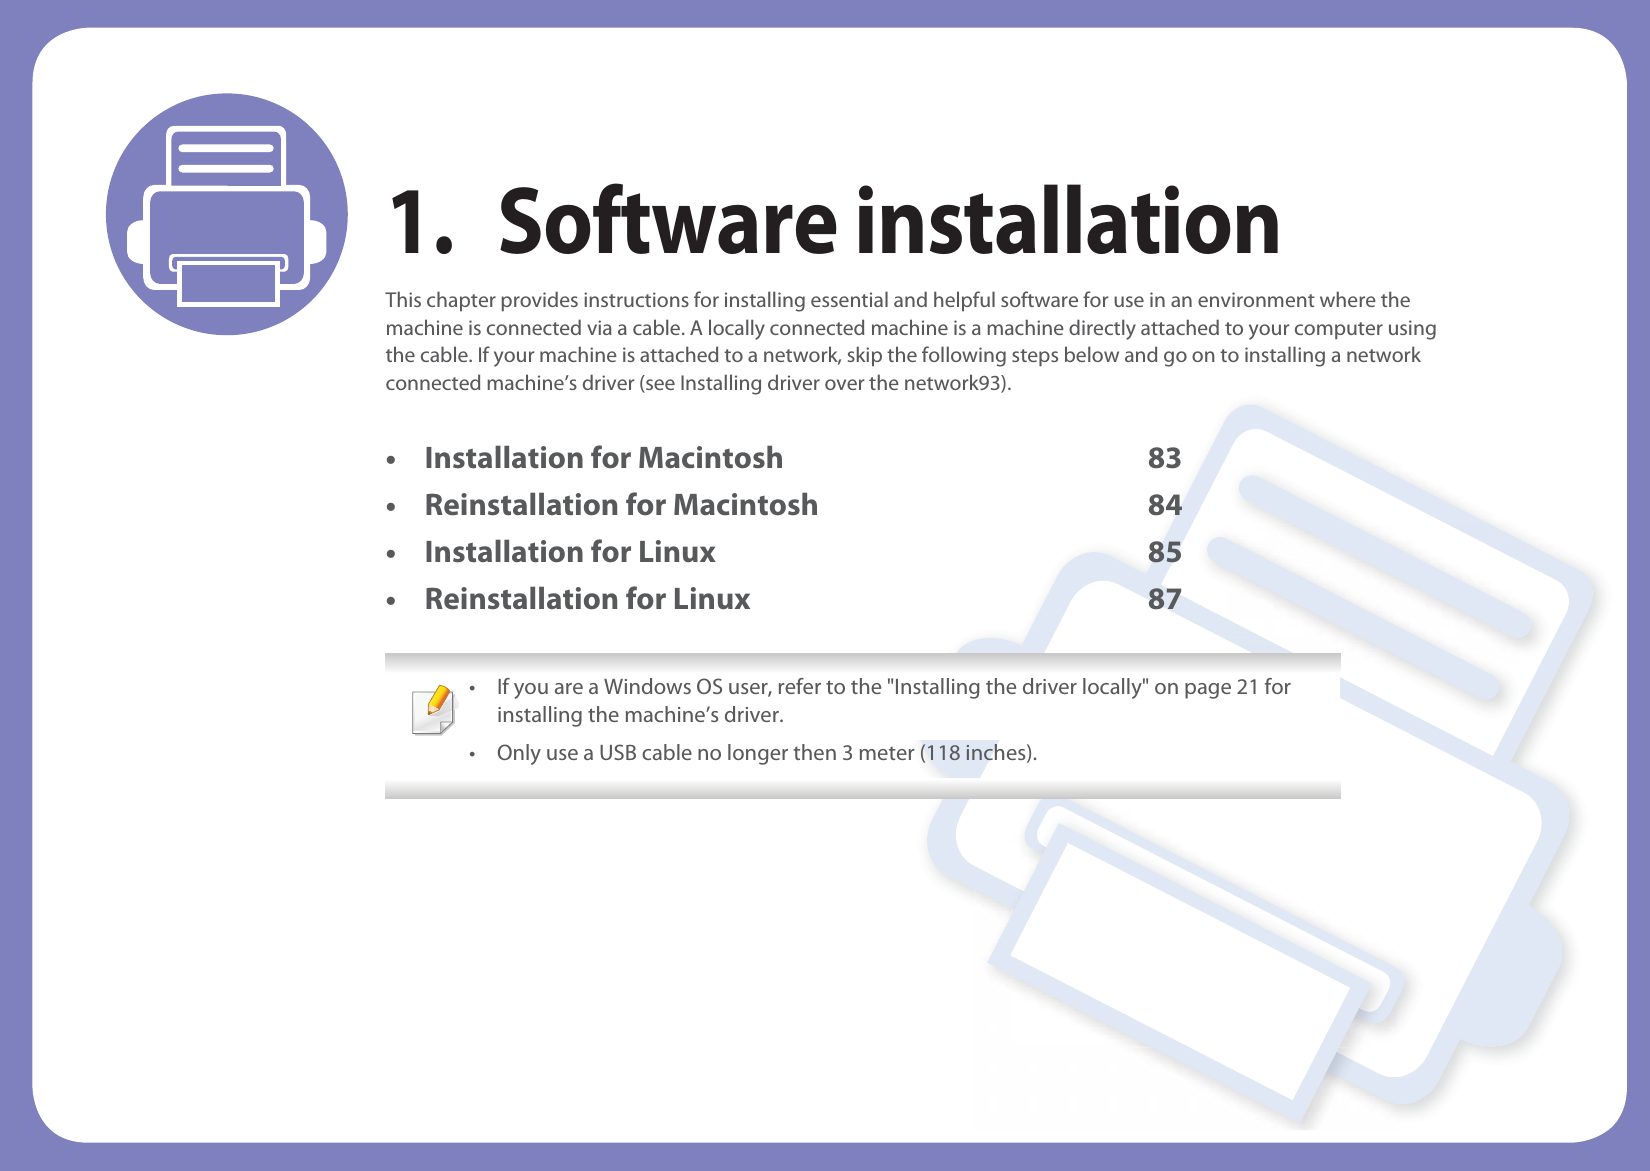 1. Software installationThis chapter provides instructions for installing essential and helpful software for use in an environment where the machine is connected via a cable. A locally connected machine is a machine directly attached to your computer using the cable. If your machine is attached to a network, skip the following steps below and go on to installing a network connected machine’s driver (see Installing driver over the network93).• Installation for Macintosh 83• Reinstallation for Macintosh 84• Installation for Linux 85• Reinstallation for Linux 87 • If you are a Windows OS user, refer to the &quot;Installing the driver locally&quot; on page 21 for installing the machine’s driver.• Only use a USB cable no longer then 3 meter (118 inches). 